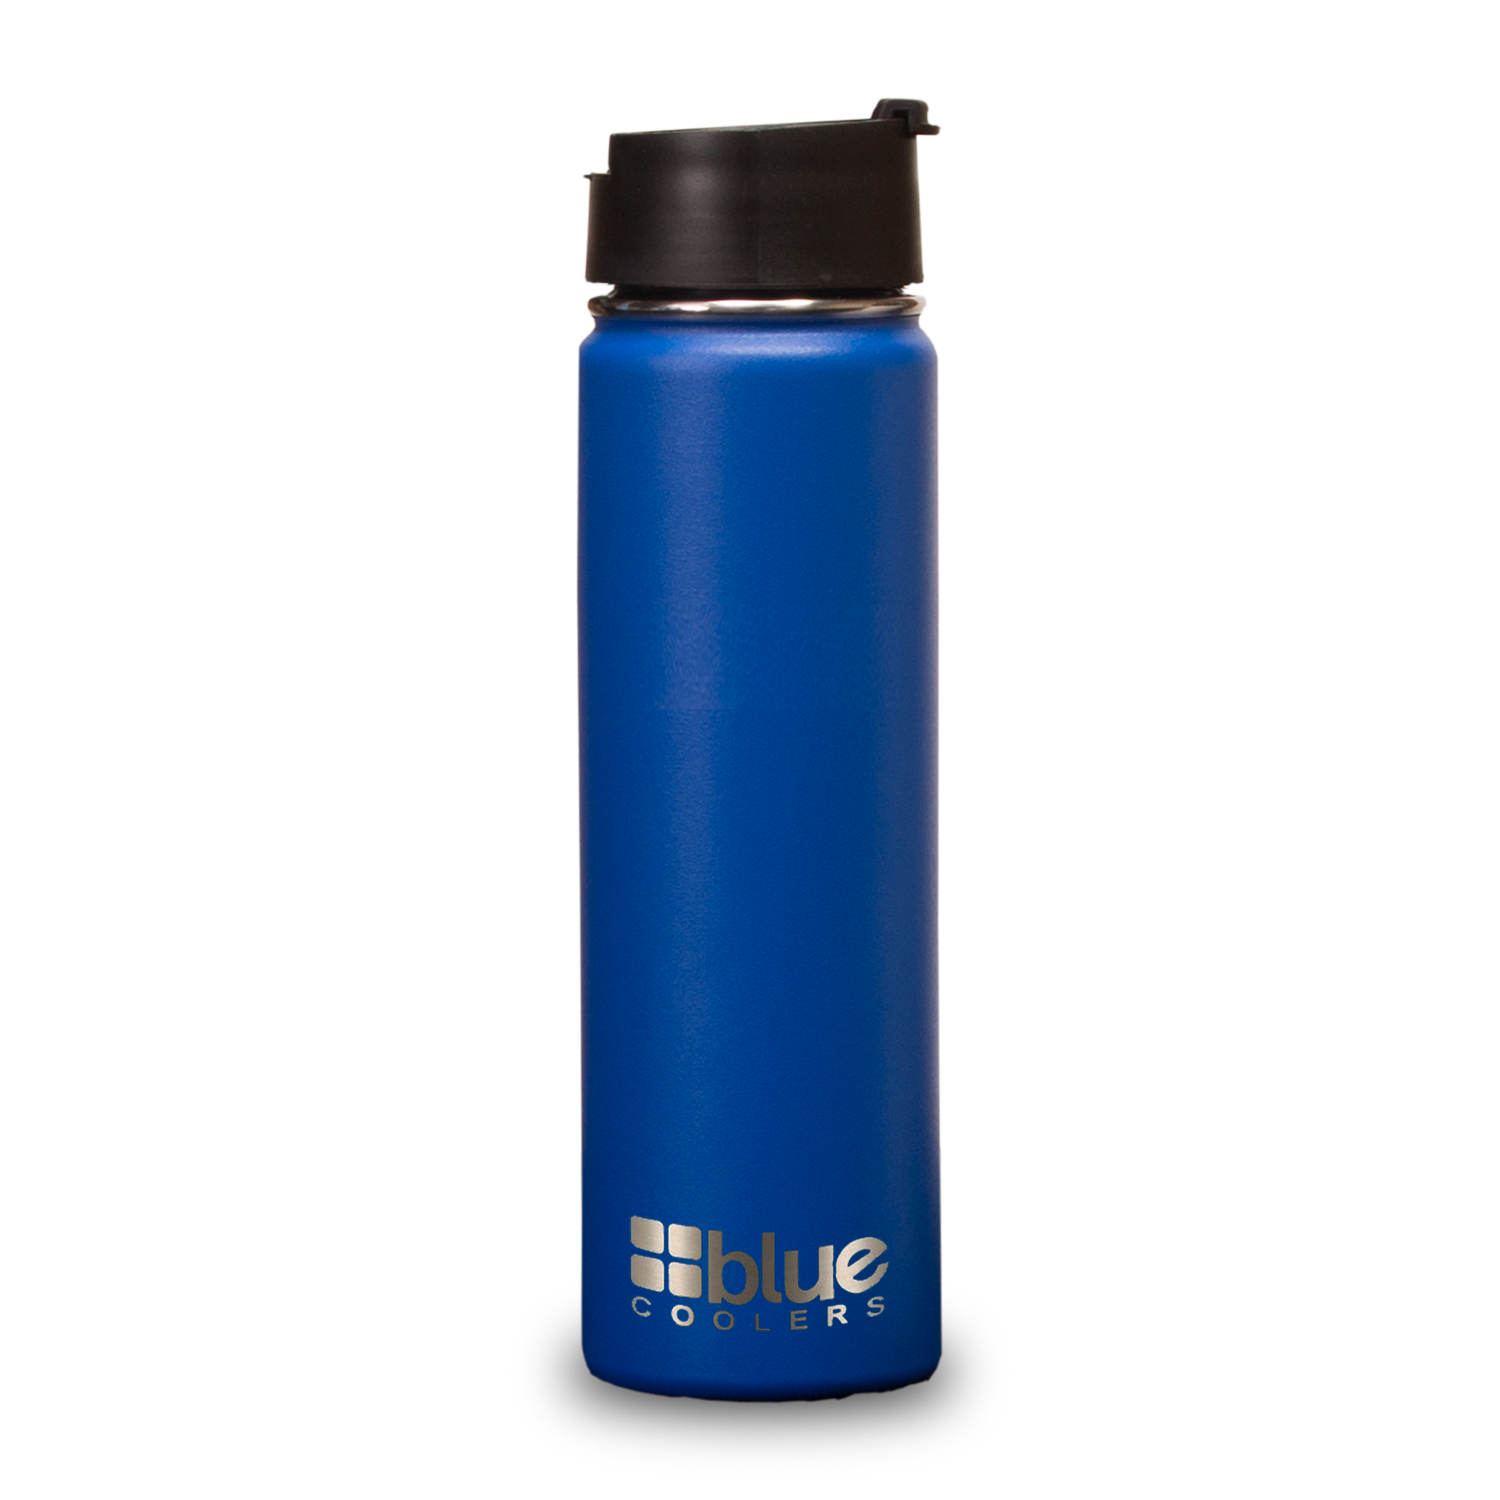 Drinkware - 20 oz. Steel Double-wall Vacuum Insulated Flask (Snap Top Lid)